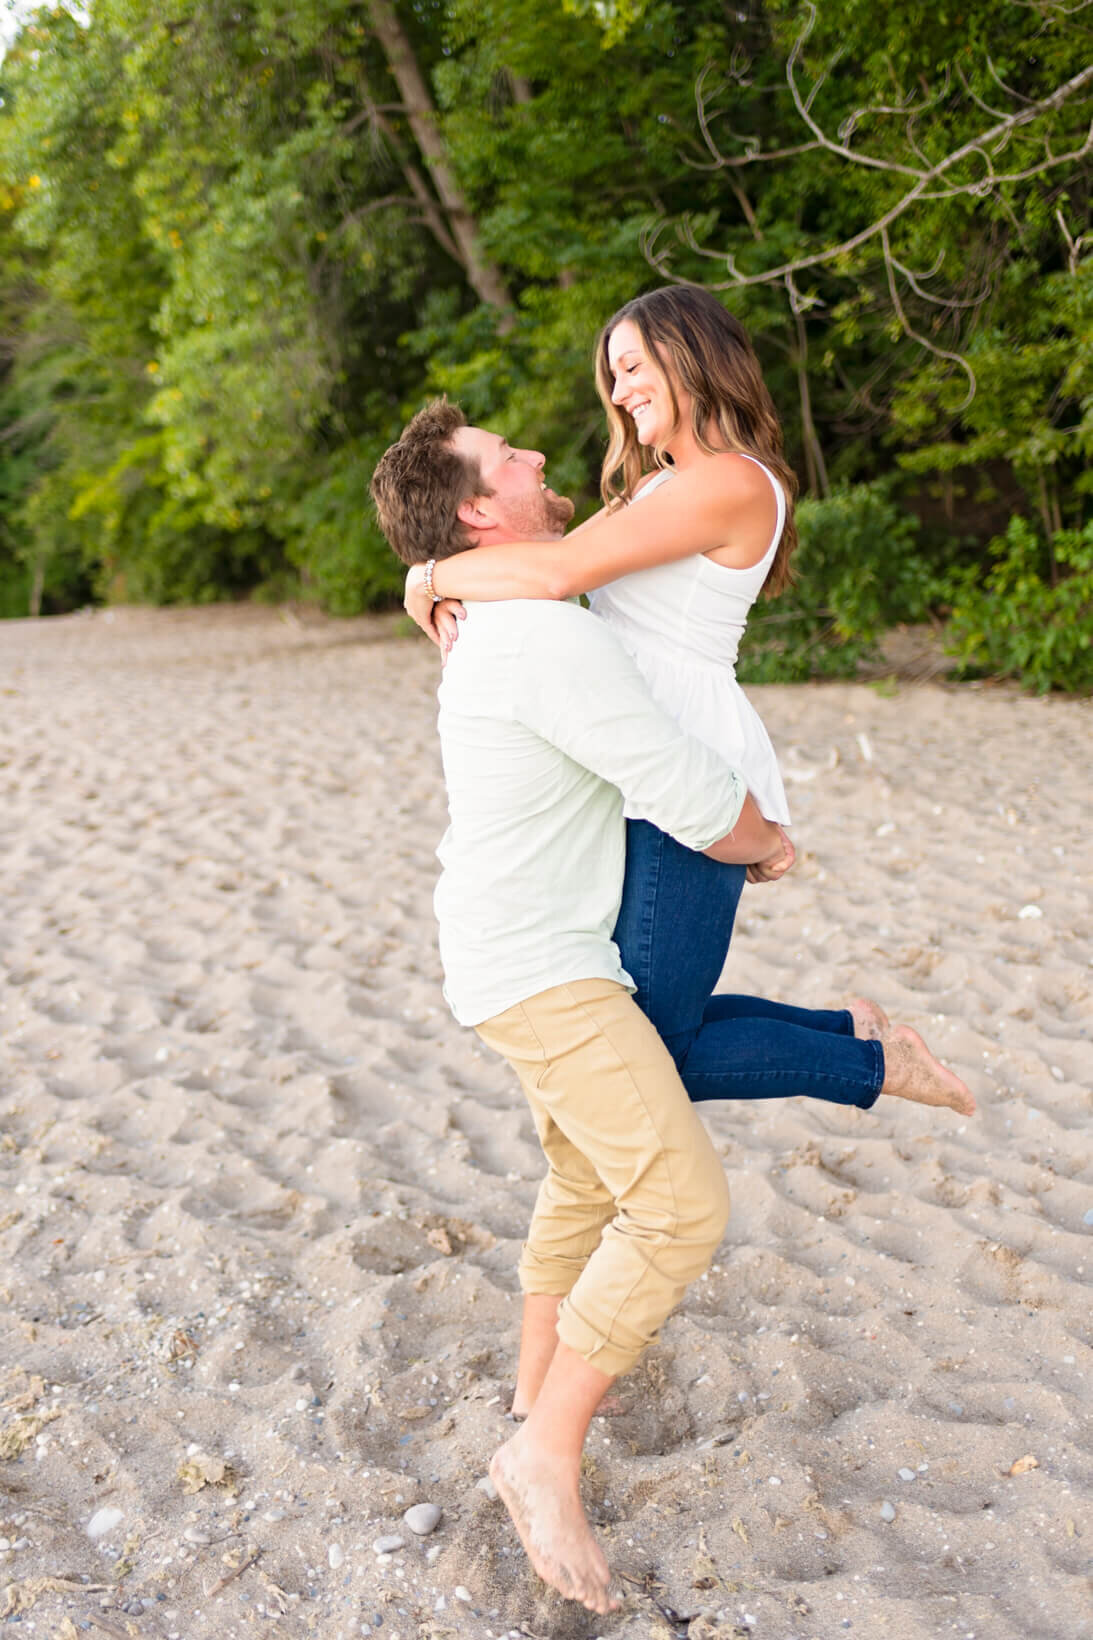 Engagement-photo-grant-park-south-milwaukee-wisconsin-51